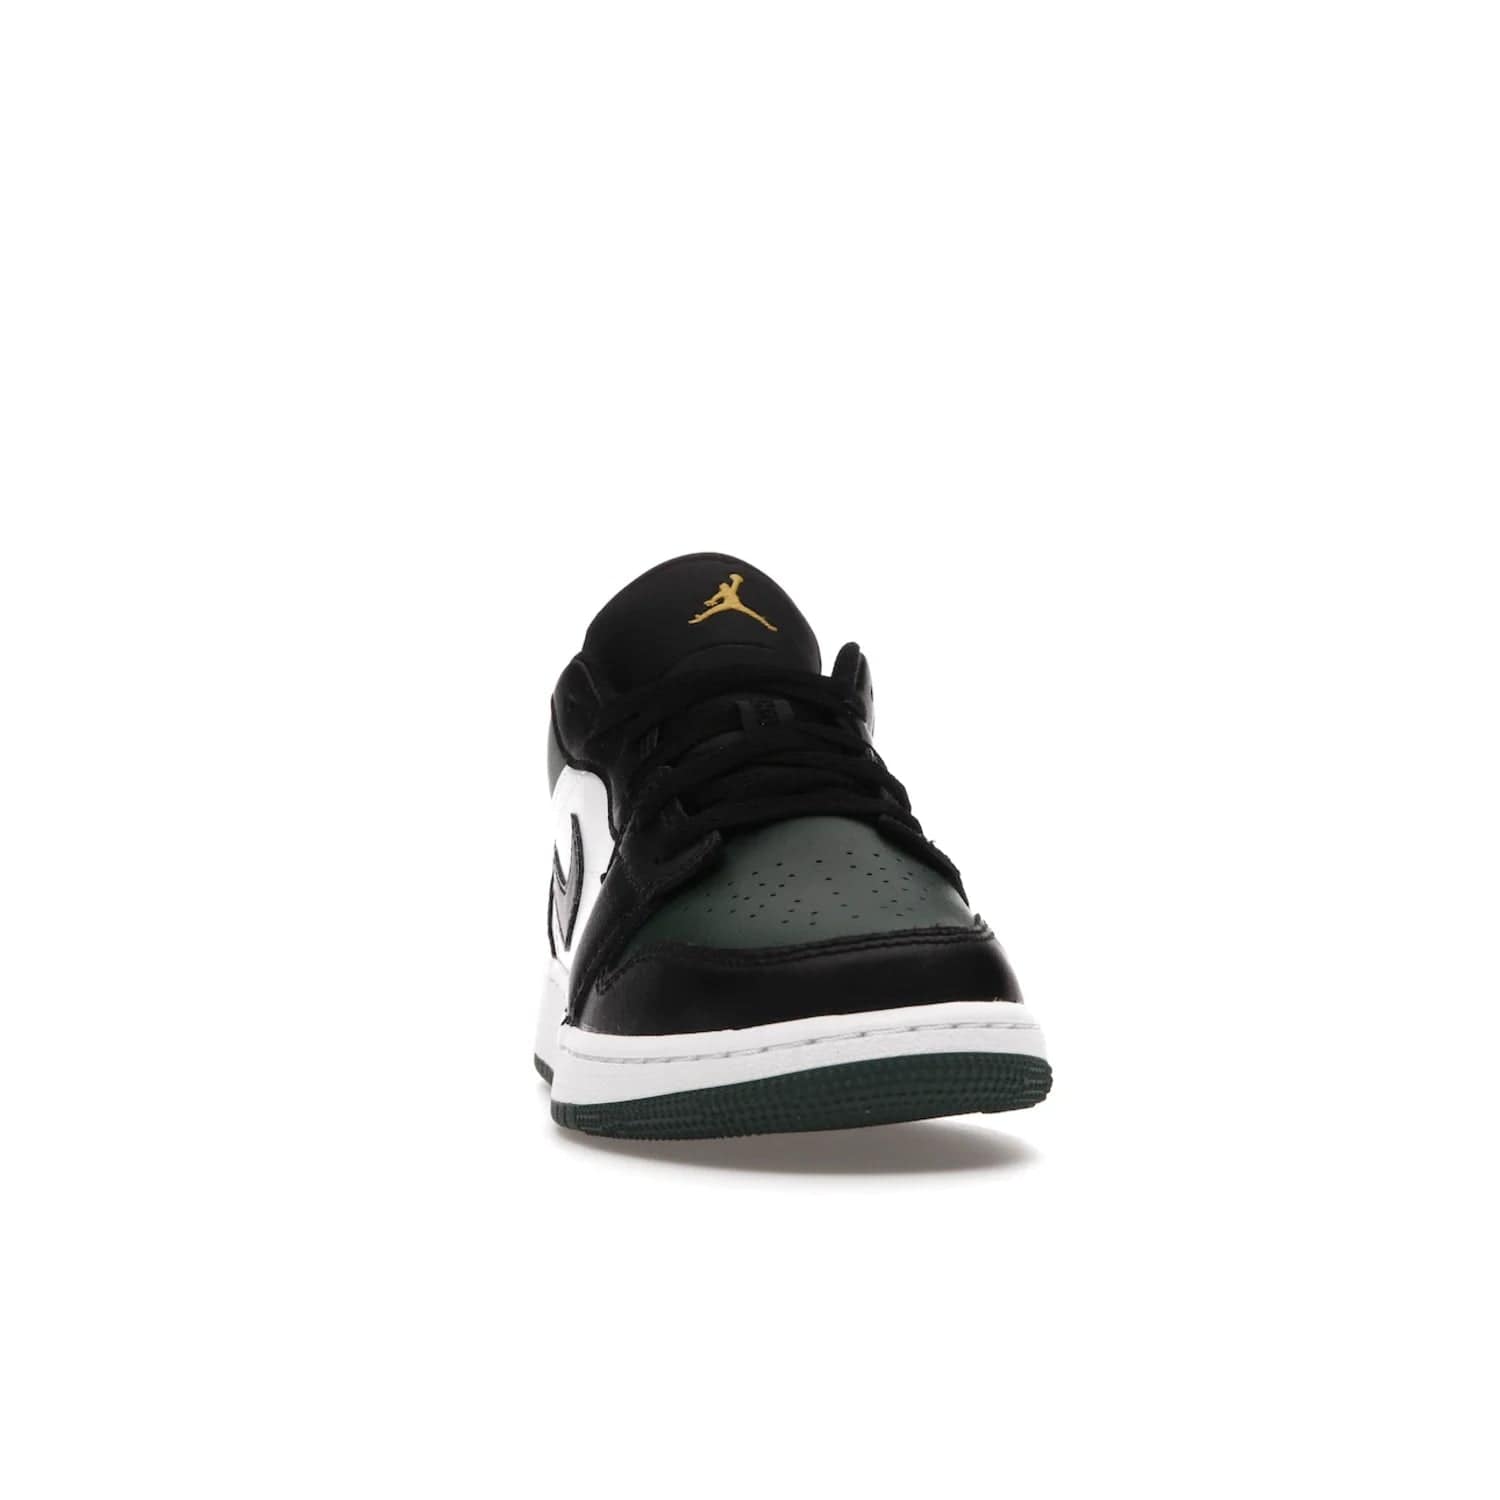 Jordan 1 Low Green Toe (GS) - Image 9 - Only at www.BallersClubKickz.com - Get the perfect low cut Jordans. Shop the Air Jordan 1 Low Noble Green GS shoes with its unique colorway and stencil Jumpman logo. Available October 2021.